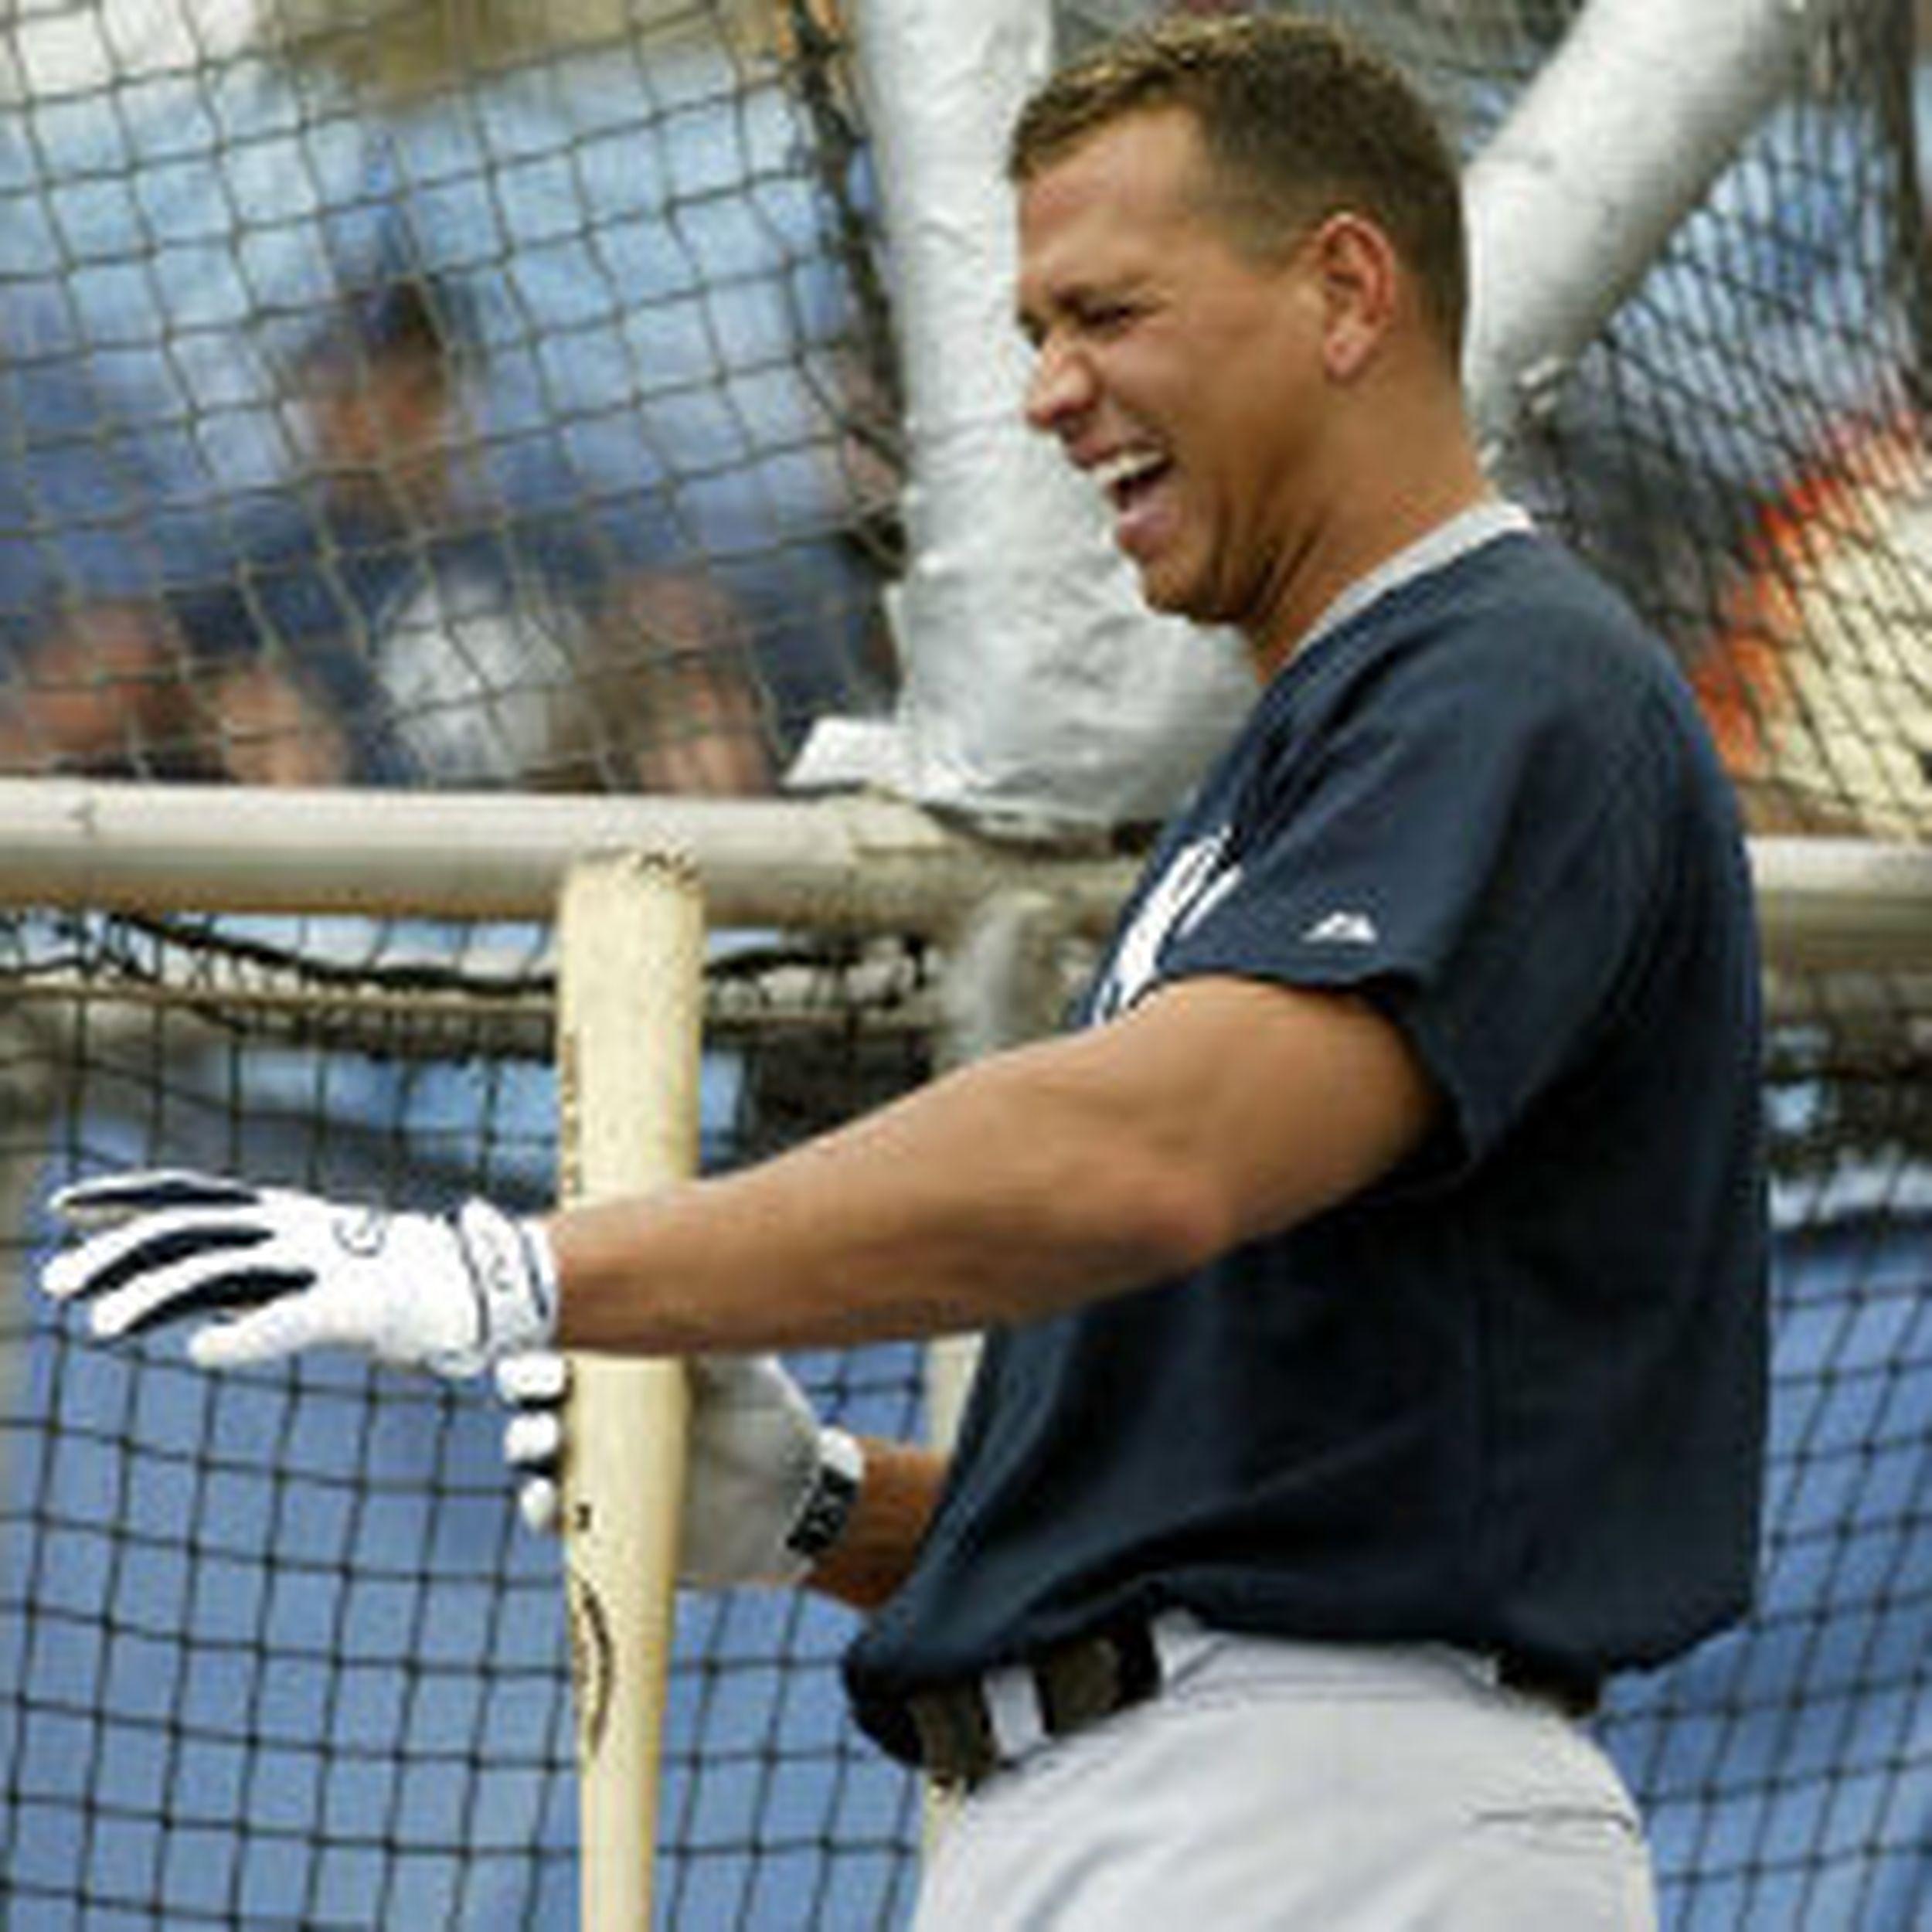 Alex Rodriguez takes high road after criticism from Jorge Posada